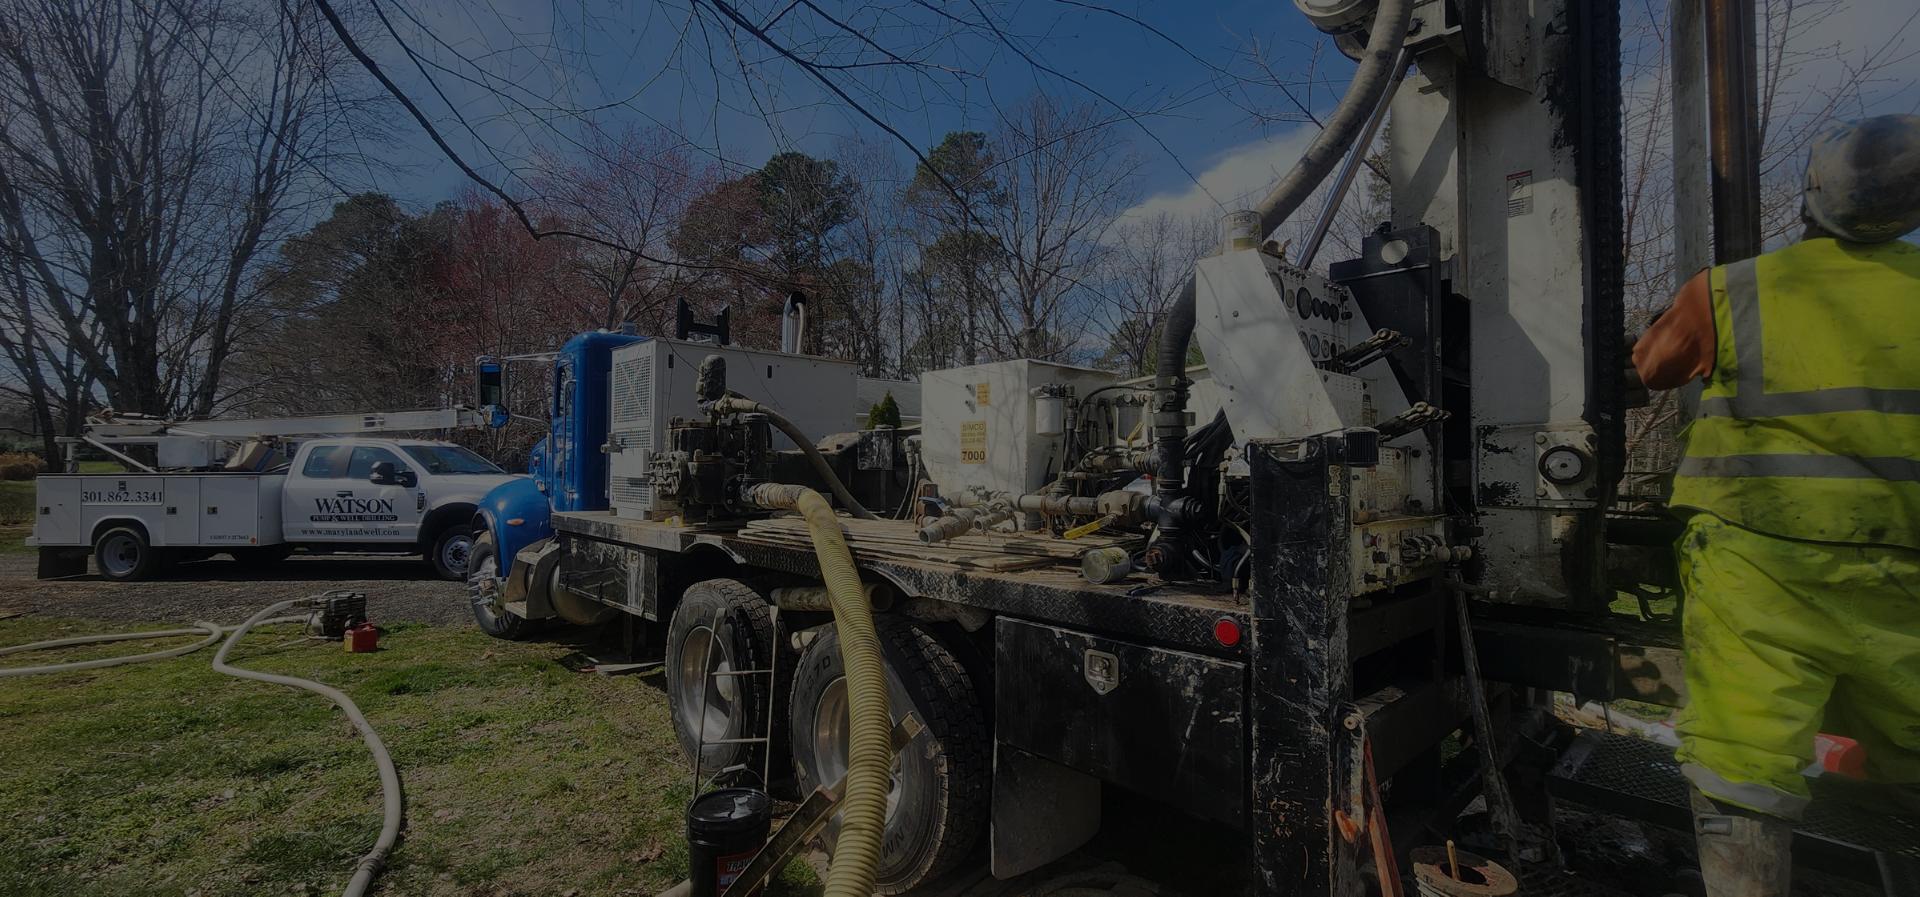 drilling an artesian water well southern maryland